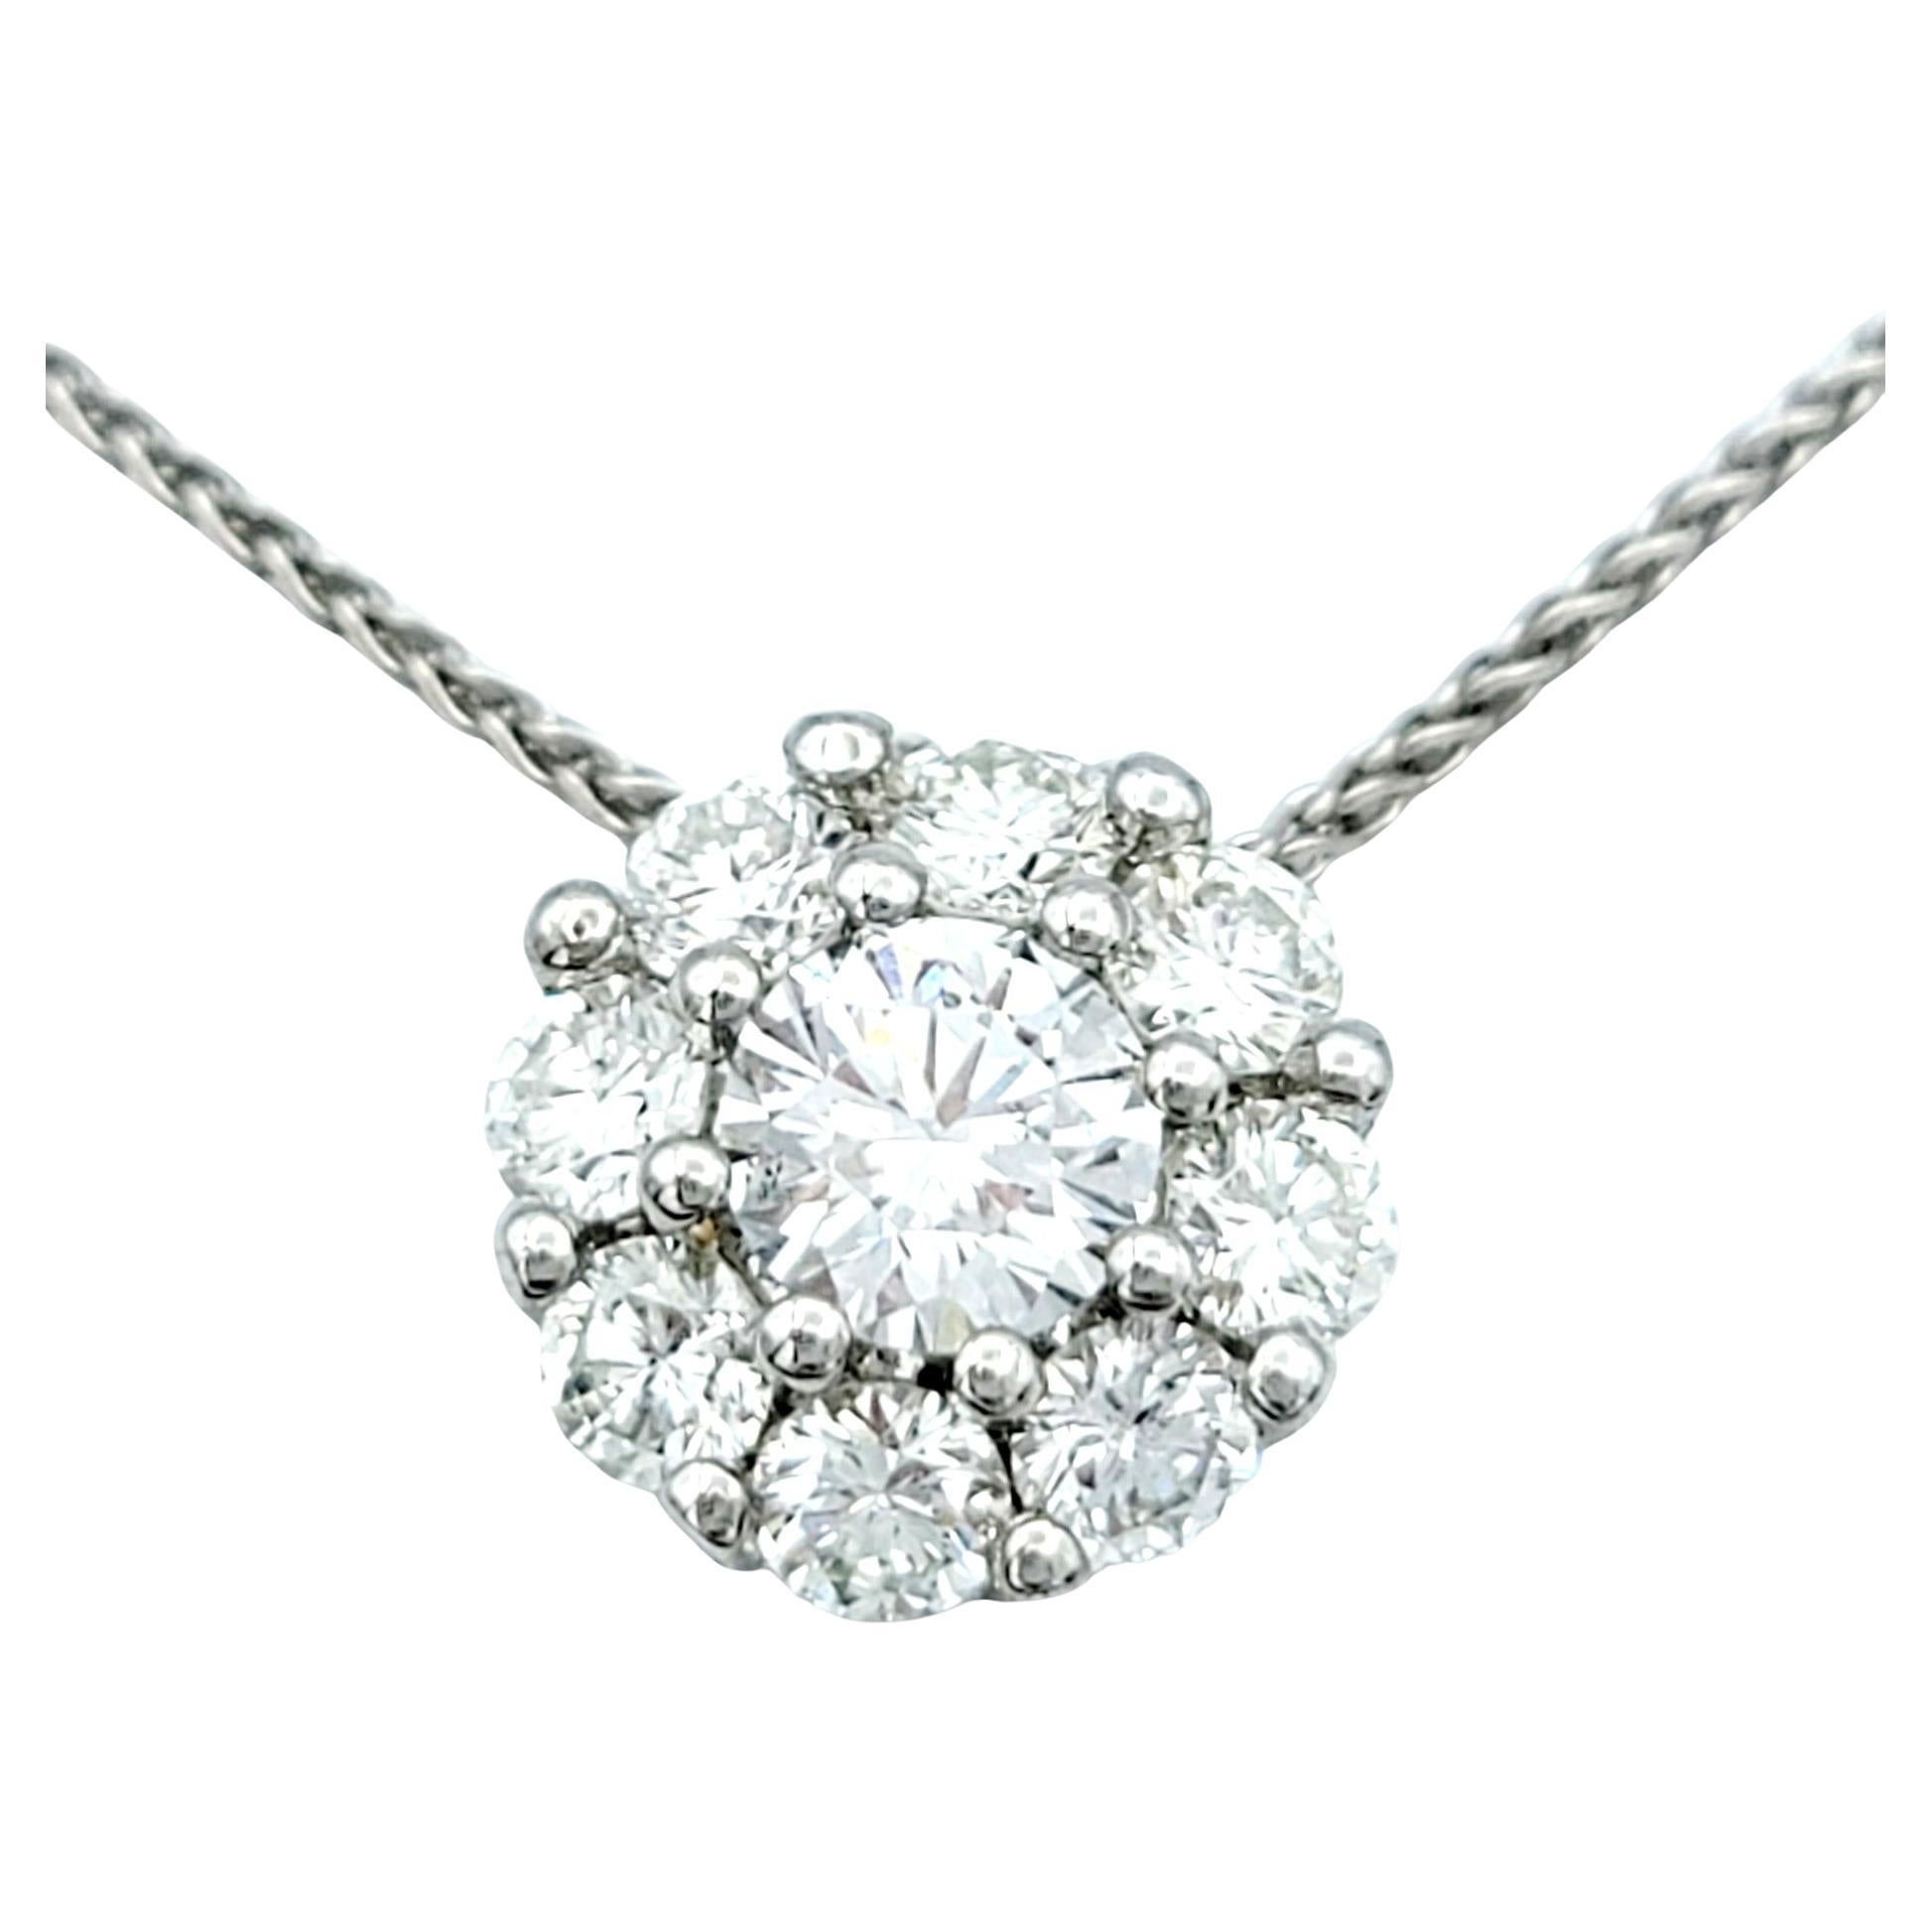  Round Diamond Halo Pendant Necklace with Wheat Chain in 18 Karat White Gold For Sale